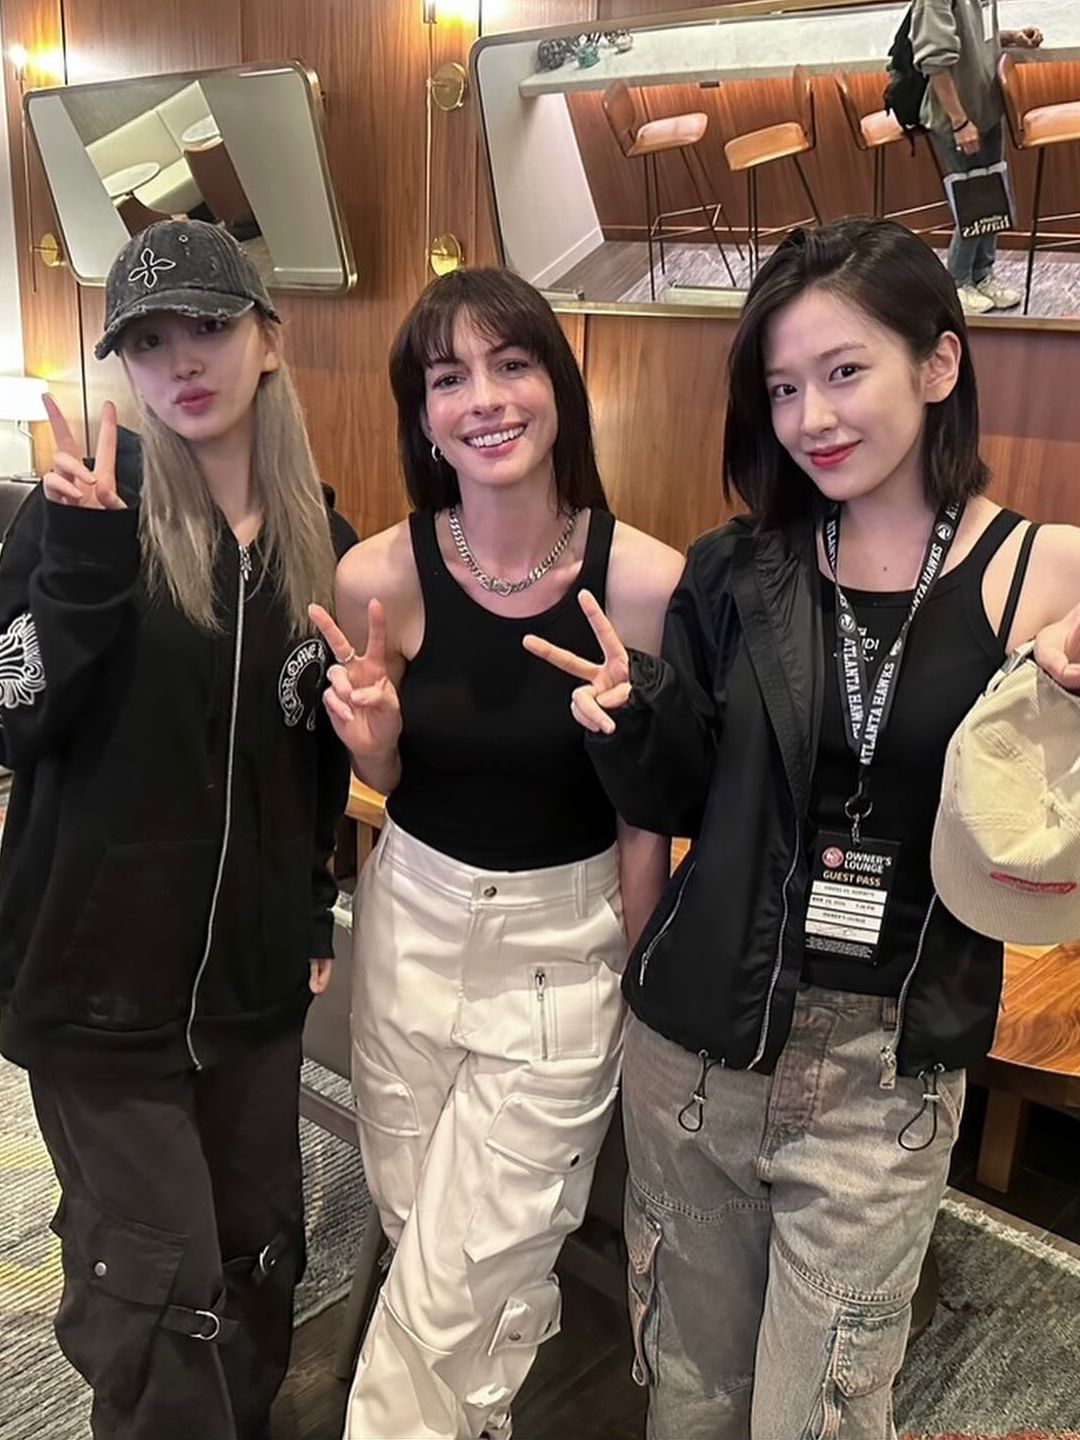 An Yujin, Anne Hathaway and LIZ pose together after a basketball game in Atlanta